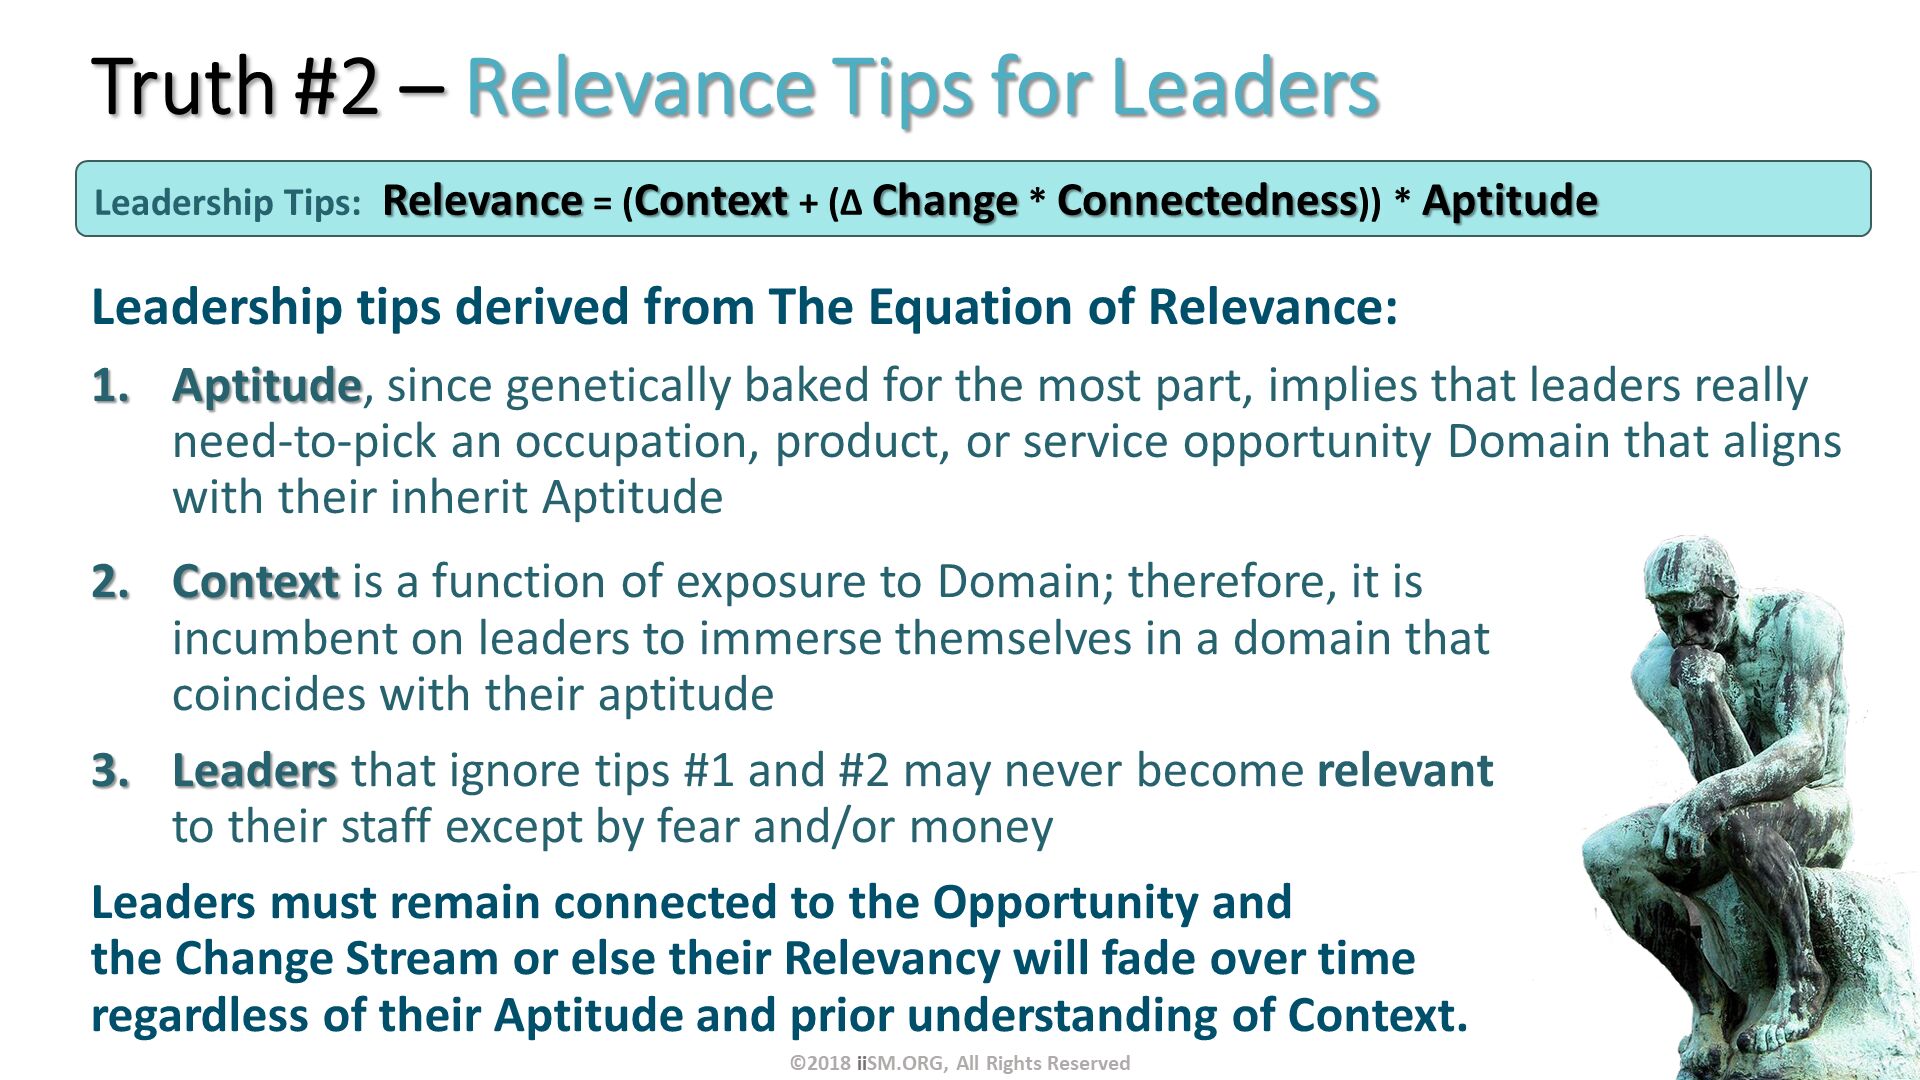 Truth #2 – Relevance Tips for Leaders. Leadership tips derived from The Equation of Relevance: 
Aptitude, since genetically baked for the most part, implies that leaders really need-to-pick an occupation, product, or service opportunity Domain that aligns with their inherit Aptitude. Leadership Tips:	Relevance = (Context + (∆ Change * Connectedness)) * Aptitude . Context is a function of exposure to Domain; therefore, it is incumbent on leaders to immerse themselves in a domain that coincides with their aptitude
Leaders that ignore tips #1 and #2 may never become relevant to their staff except by fear and/or money
Leaders must remain connected to the Opportunity and the Change Stream or else their Relevancy will fade over time regardless of their Aptitude and prior understanding of Context.
. ©2018 iiSM.ORG, All Rights Reserved. 